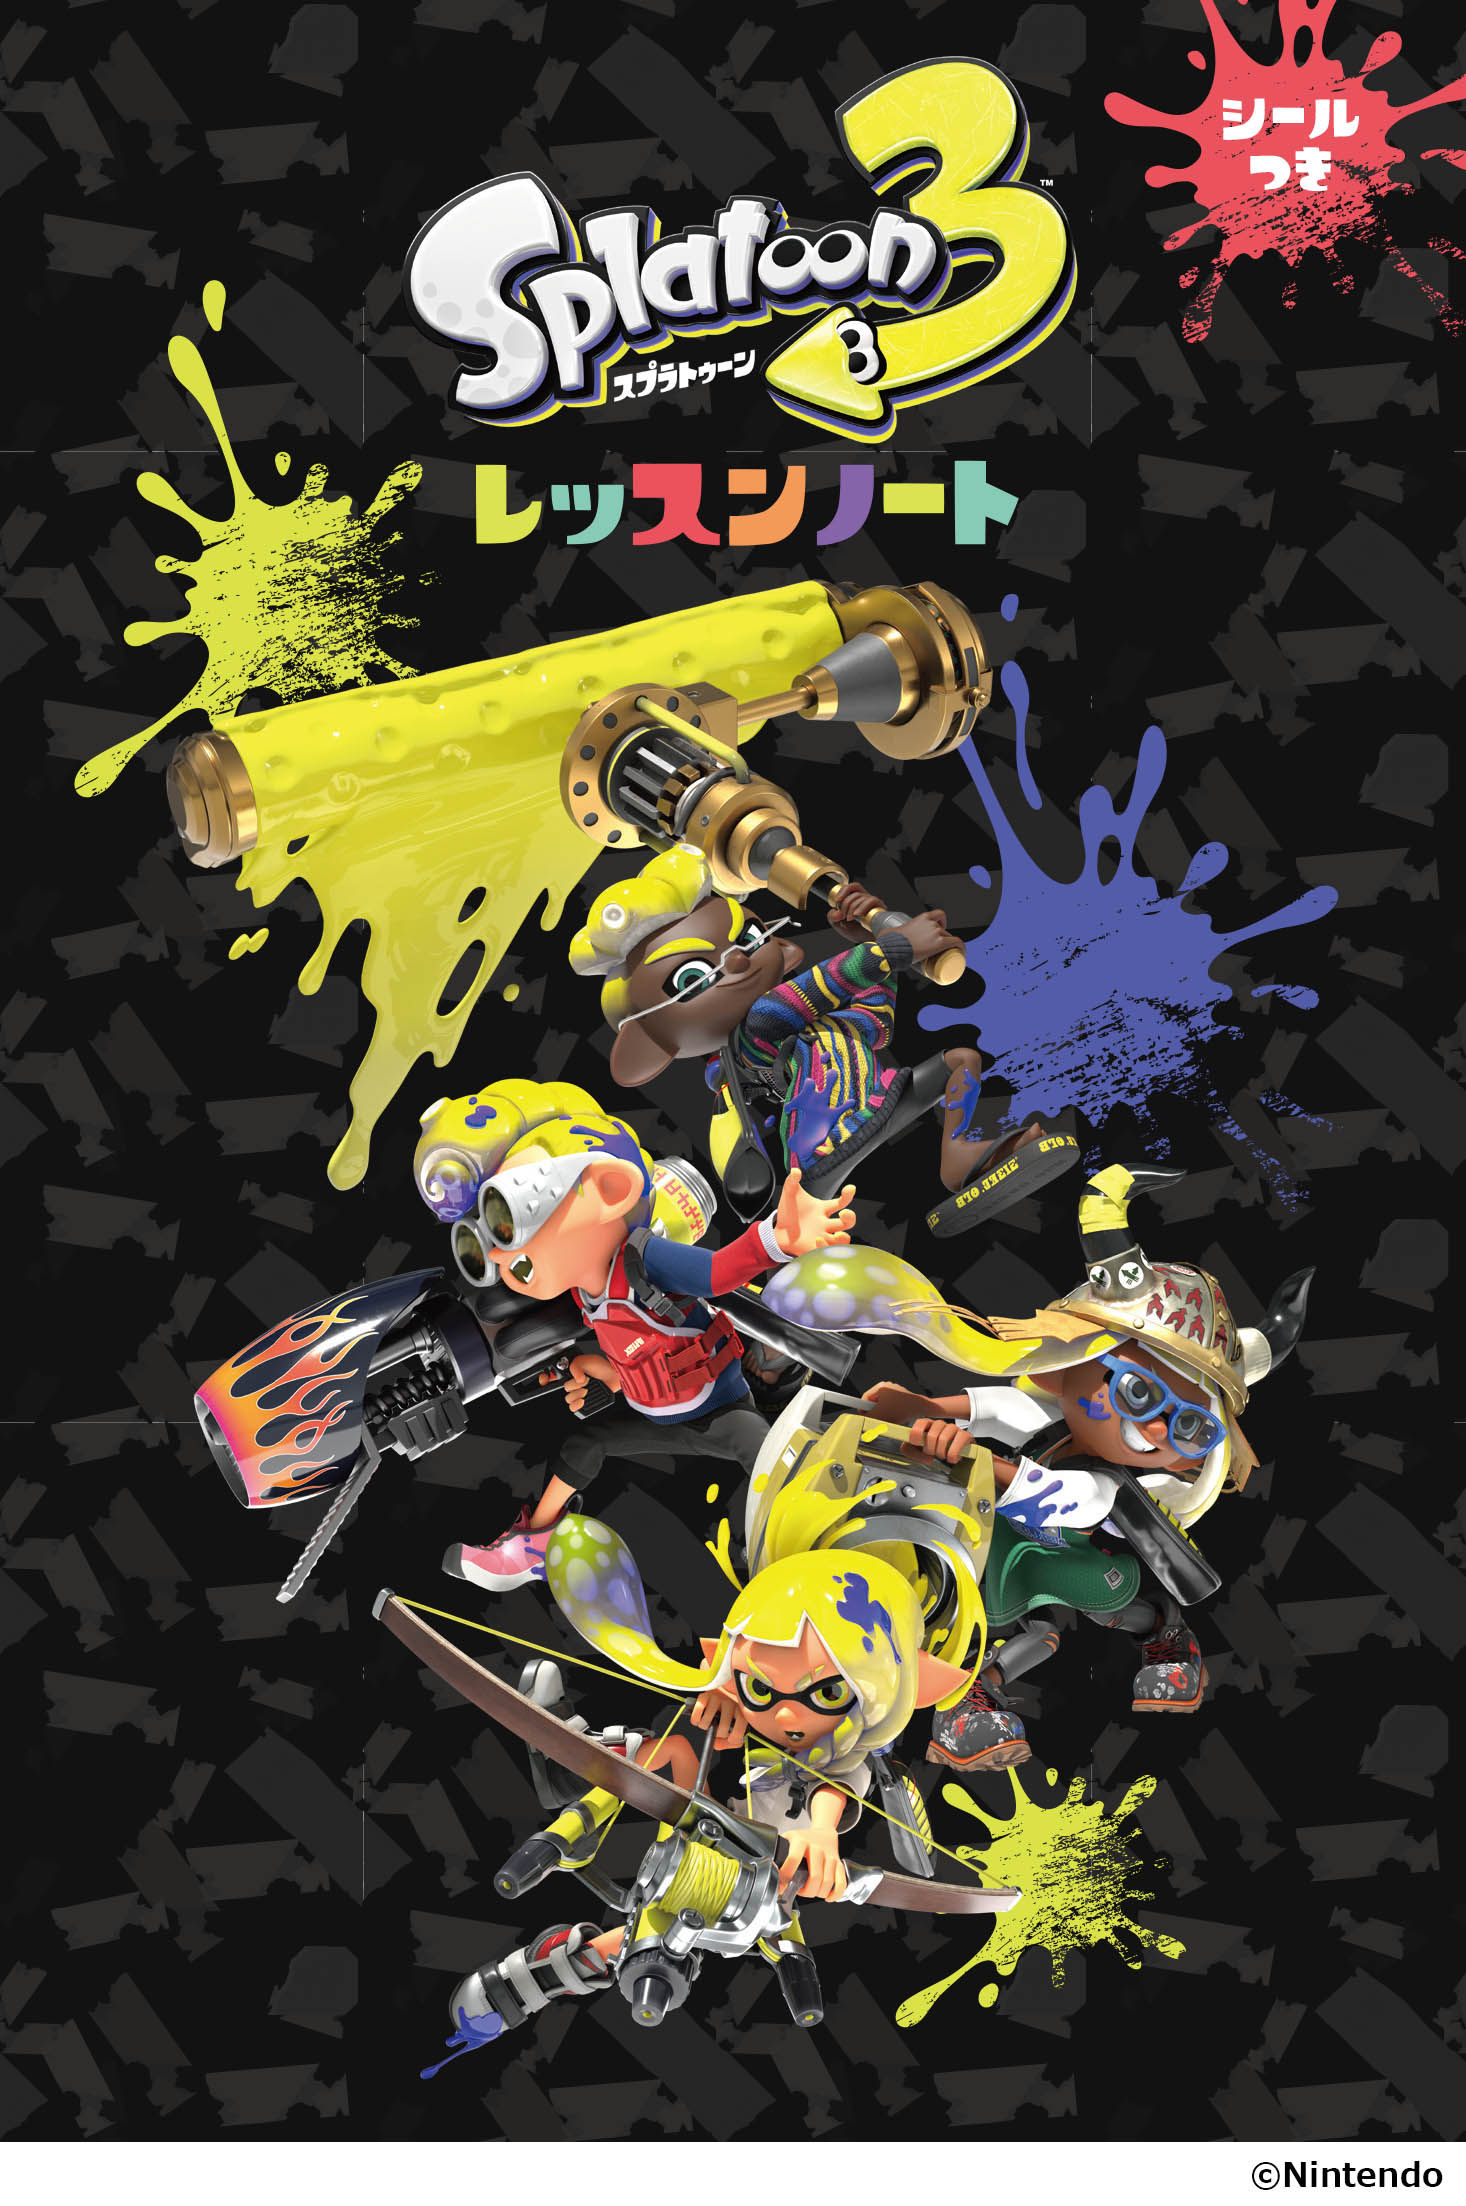 Yamaha Music Entertainment Releases Splatoon 3 Music Stationery for Nintendo Switch Game